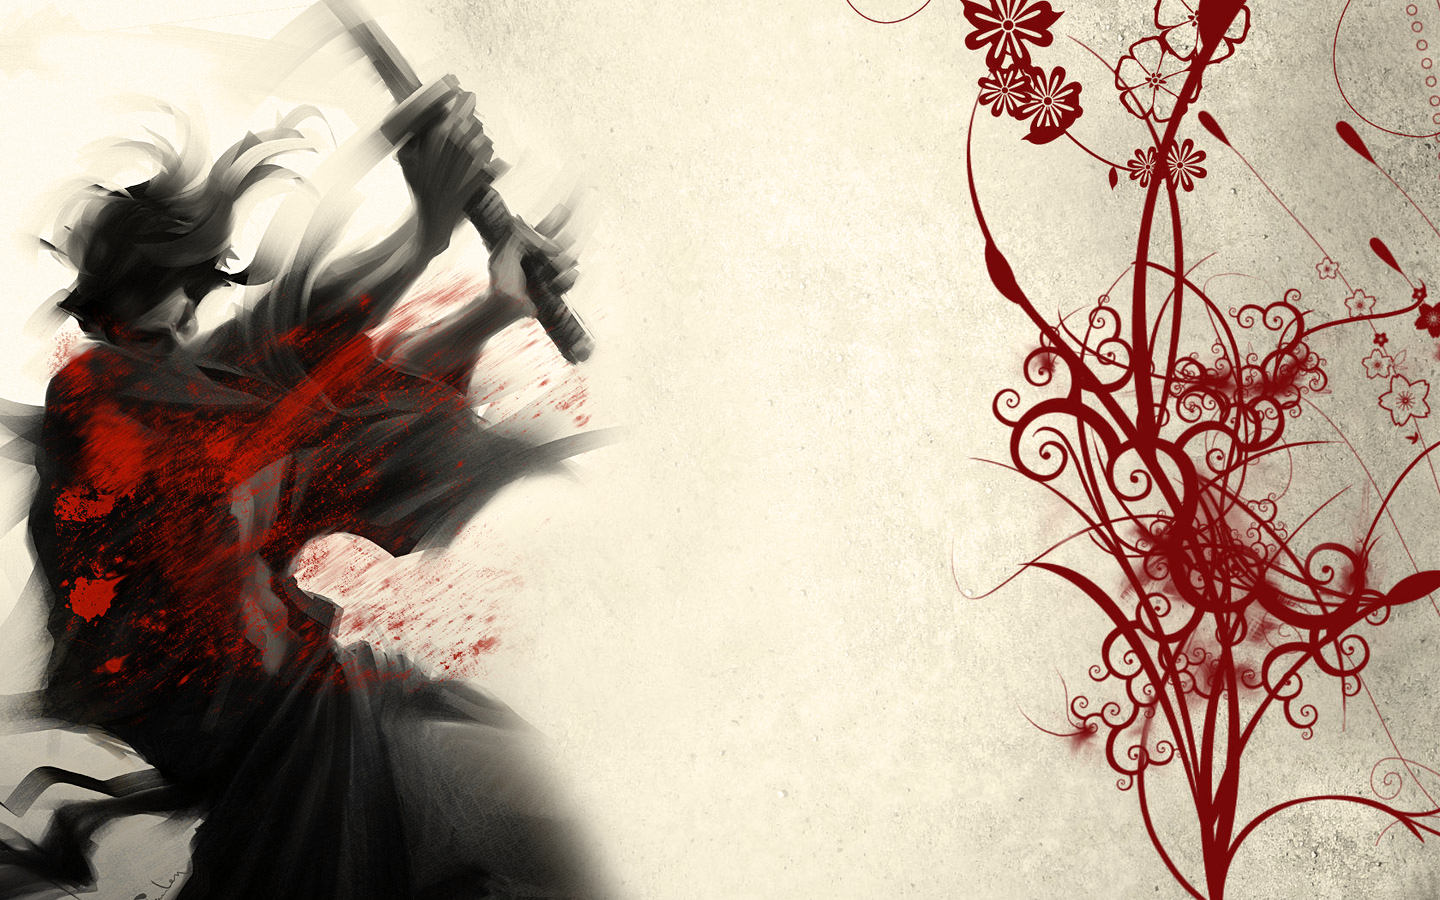 Samurai Pack 2 Live Wallpaper - Android Apps on Google Play